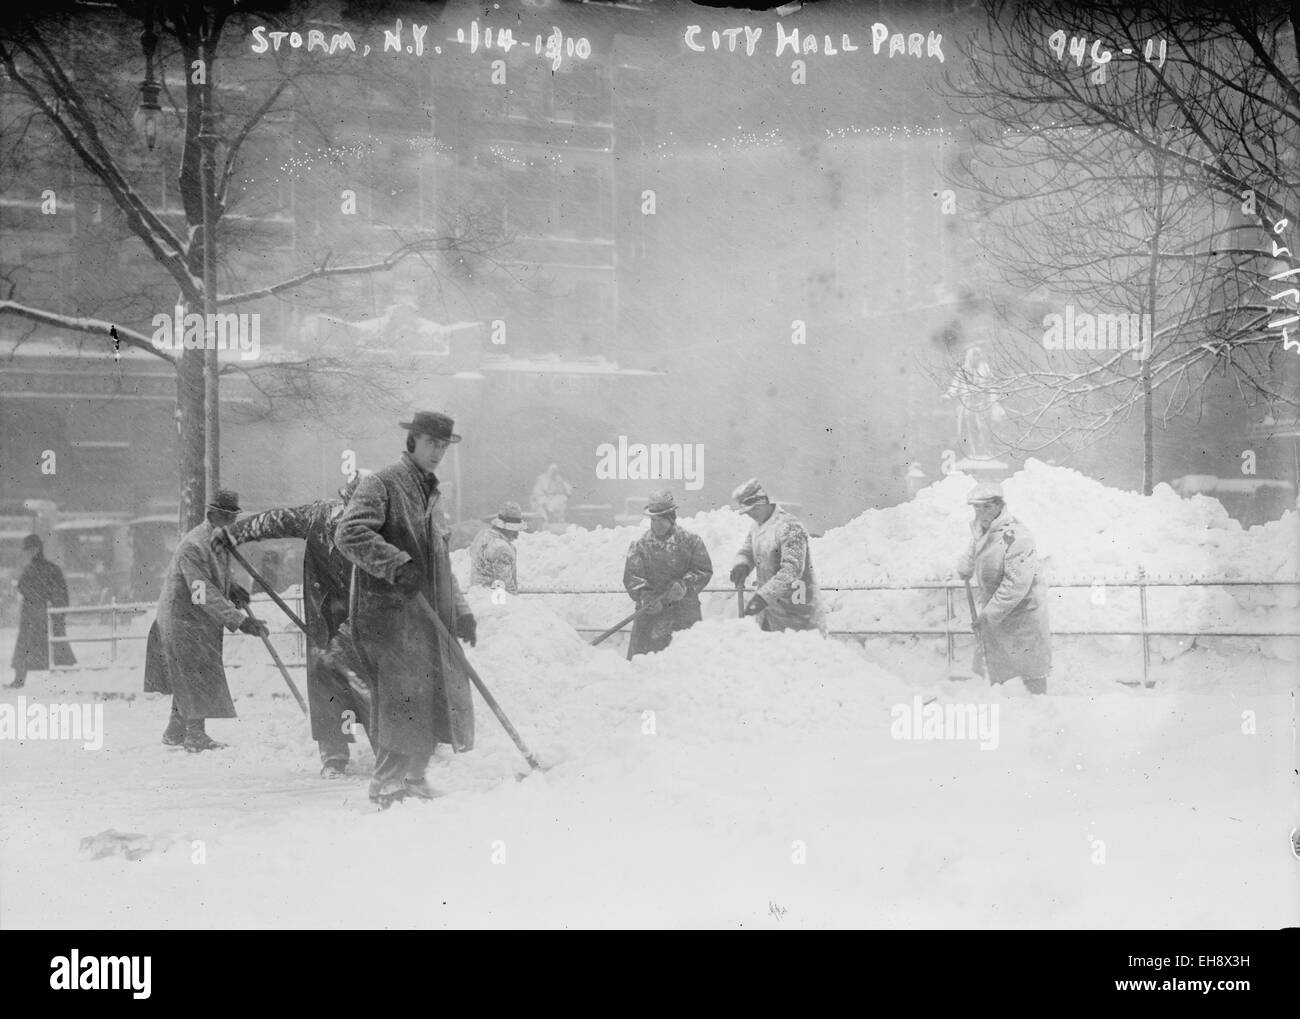 Workers shovel snow in City Hall Park in New York on January 14-15/1910. (Library of Congress) Stock Photo